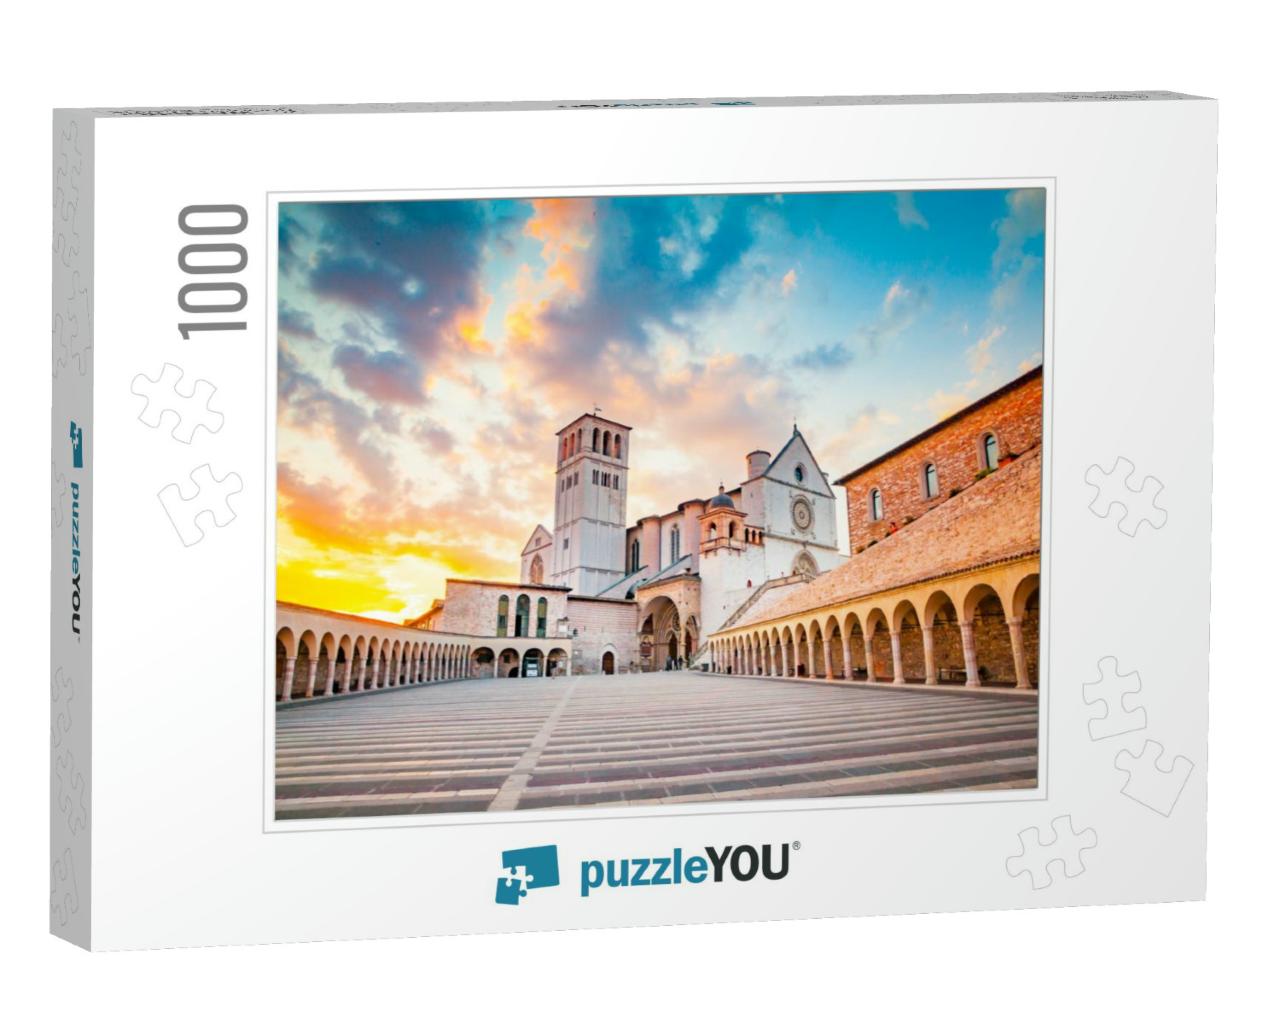 Famous Basilica of St. Francis of Assisi Basilica Papale... Jigsaw Puzzle with 1000 pieces